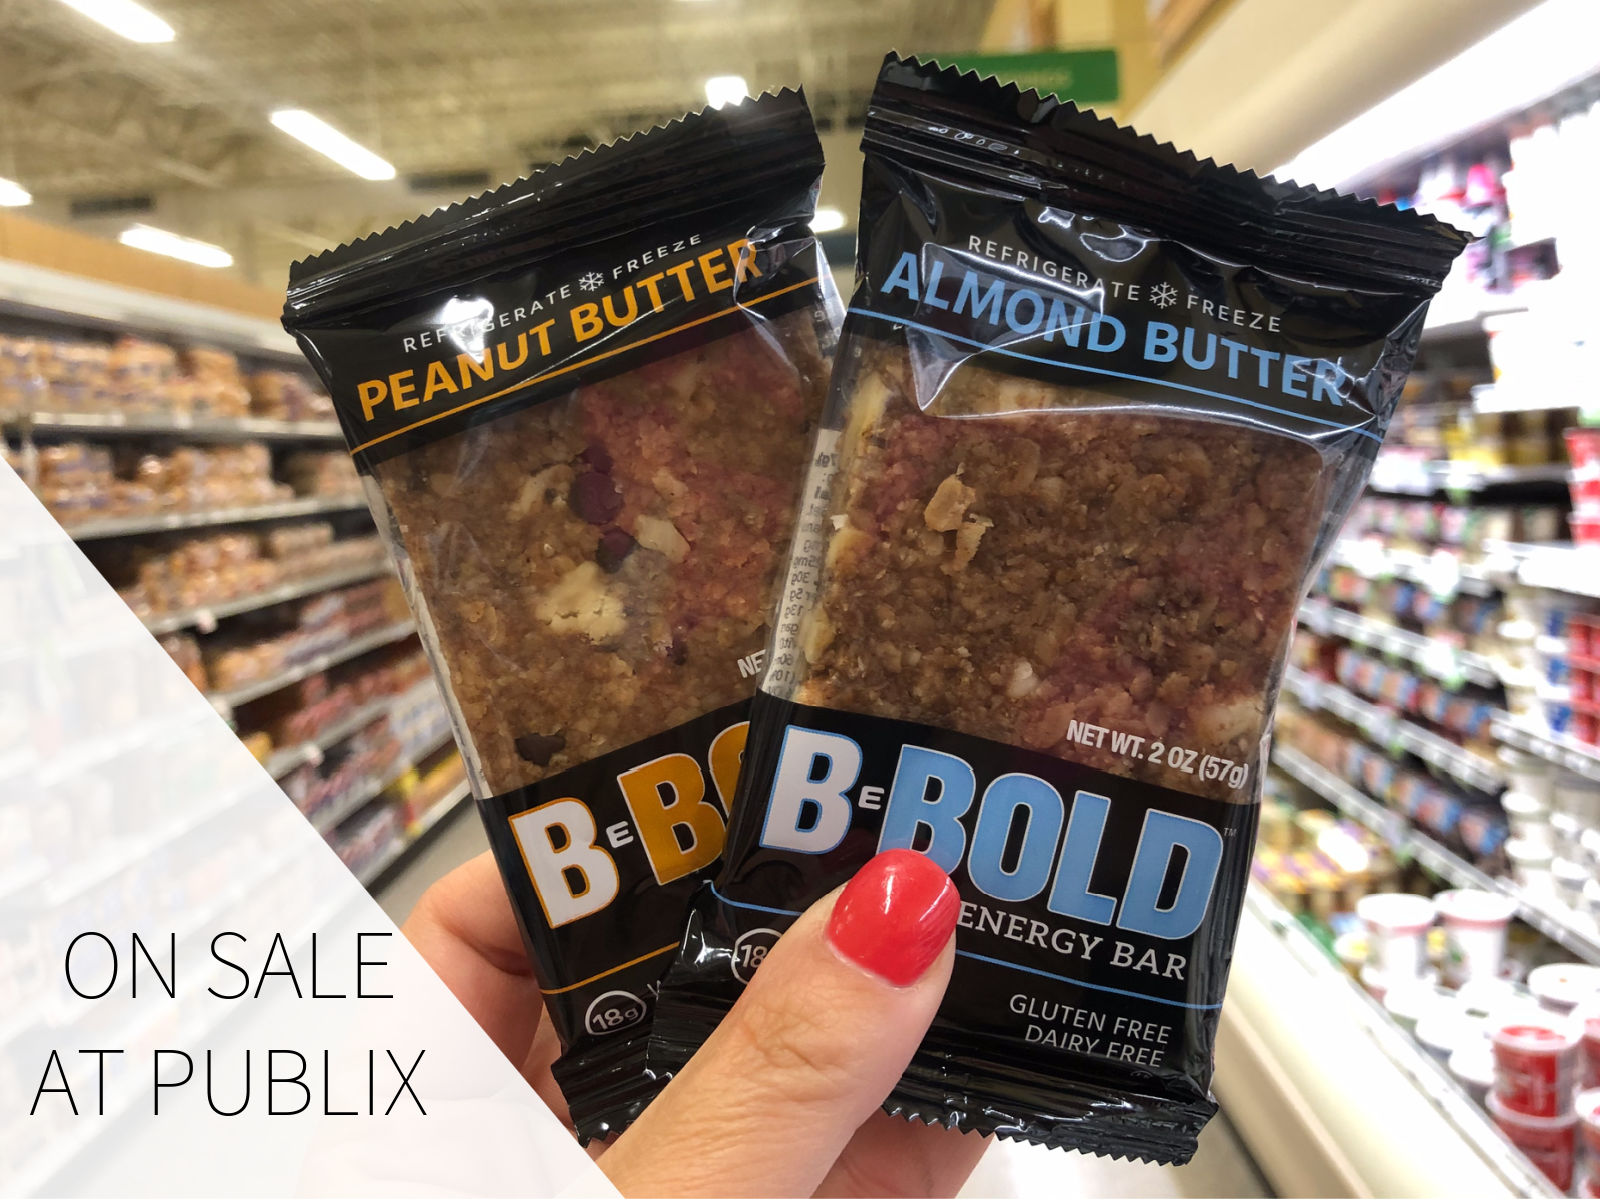 BeBOLD Bars From The Founder Of Stacy’s Pita Chips Are On Sale NOW At Publix + Four Readers Will Win A $25 Publix Gift Card To Try Them For FREE!